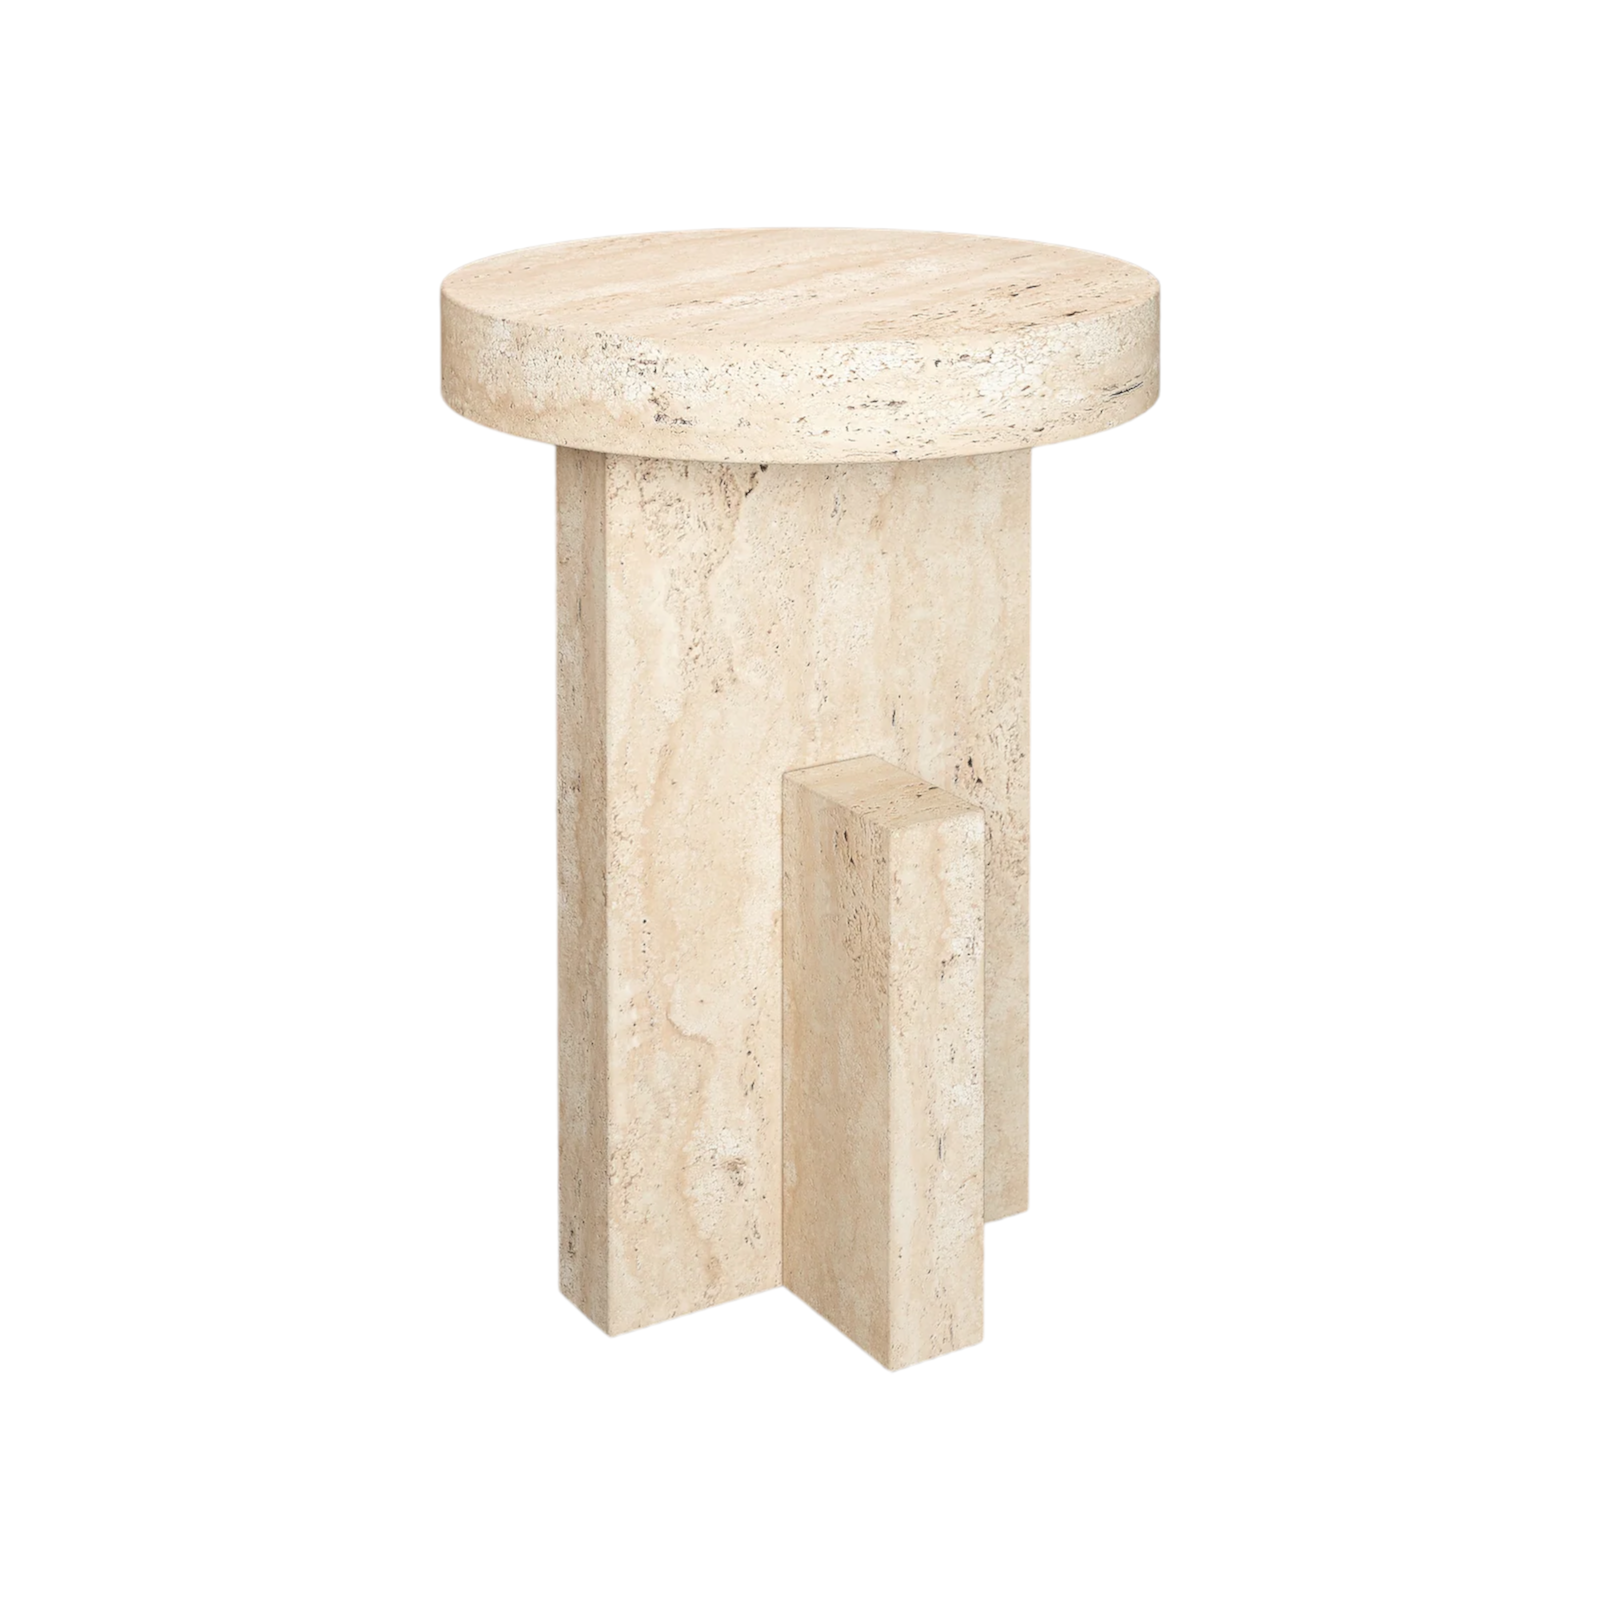 LEXI HAND CRAFTED ORGANIC TRAVERTINE SIDE TABLE